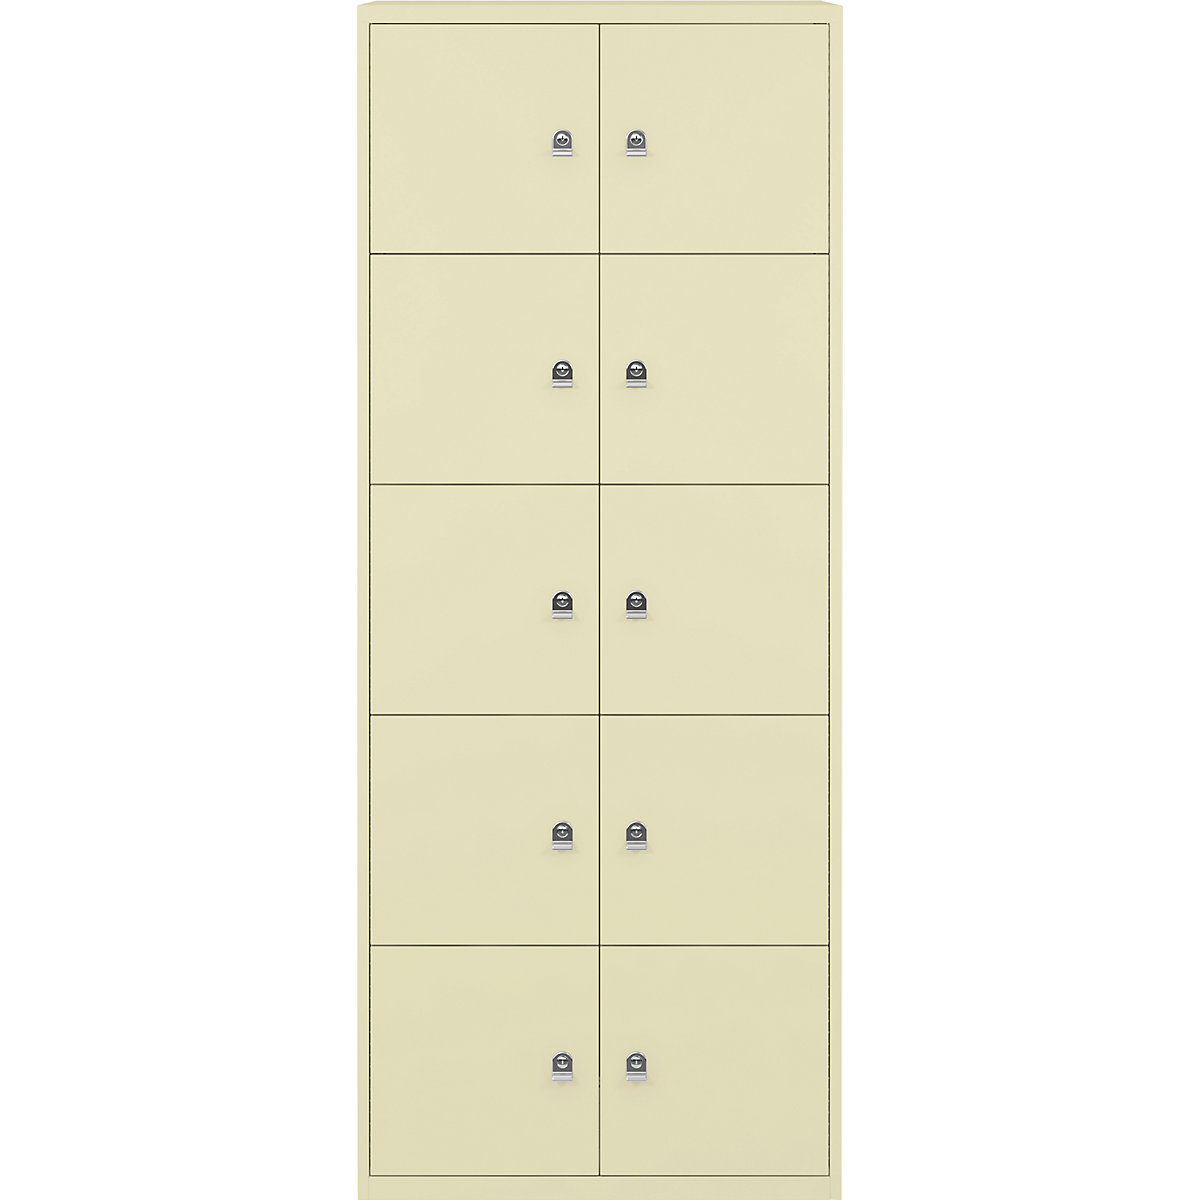 BISLEY – LateralFile™ lodge, with 10 lockable compartments, height 375 mm each, cream